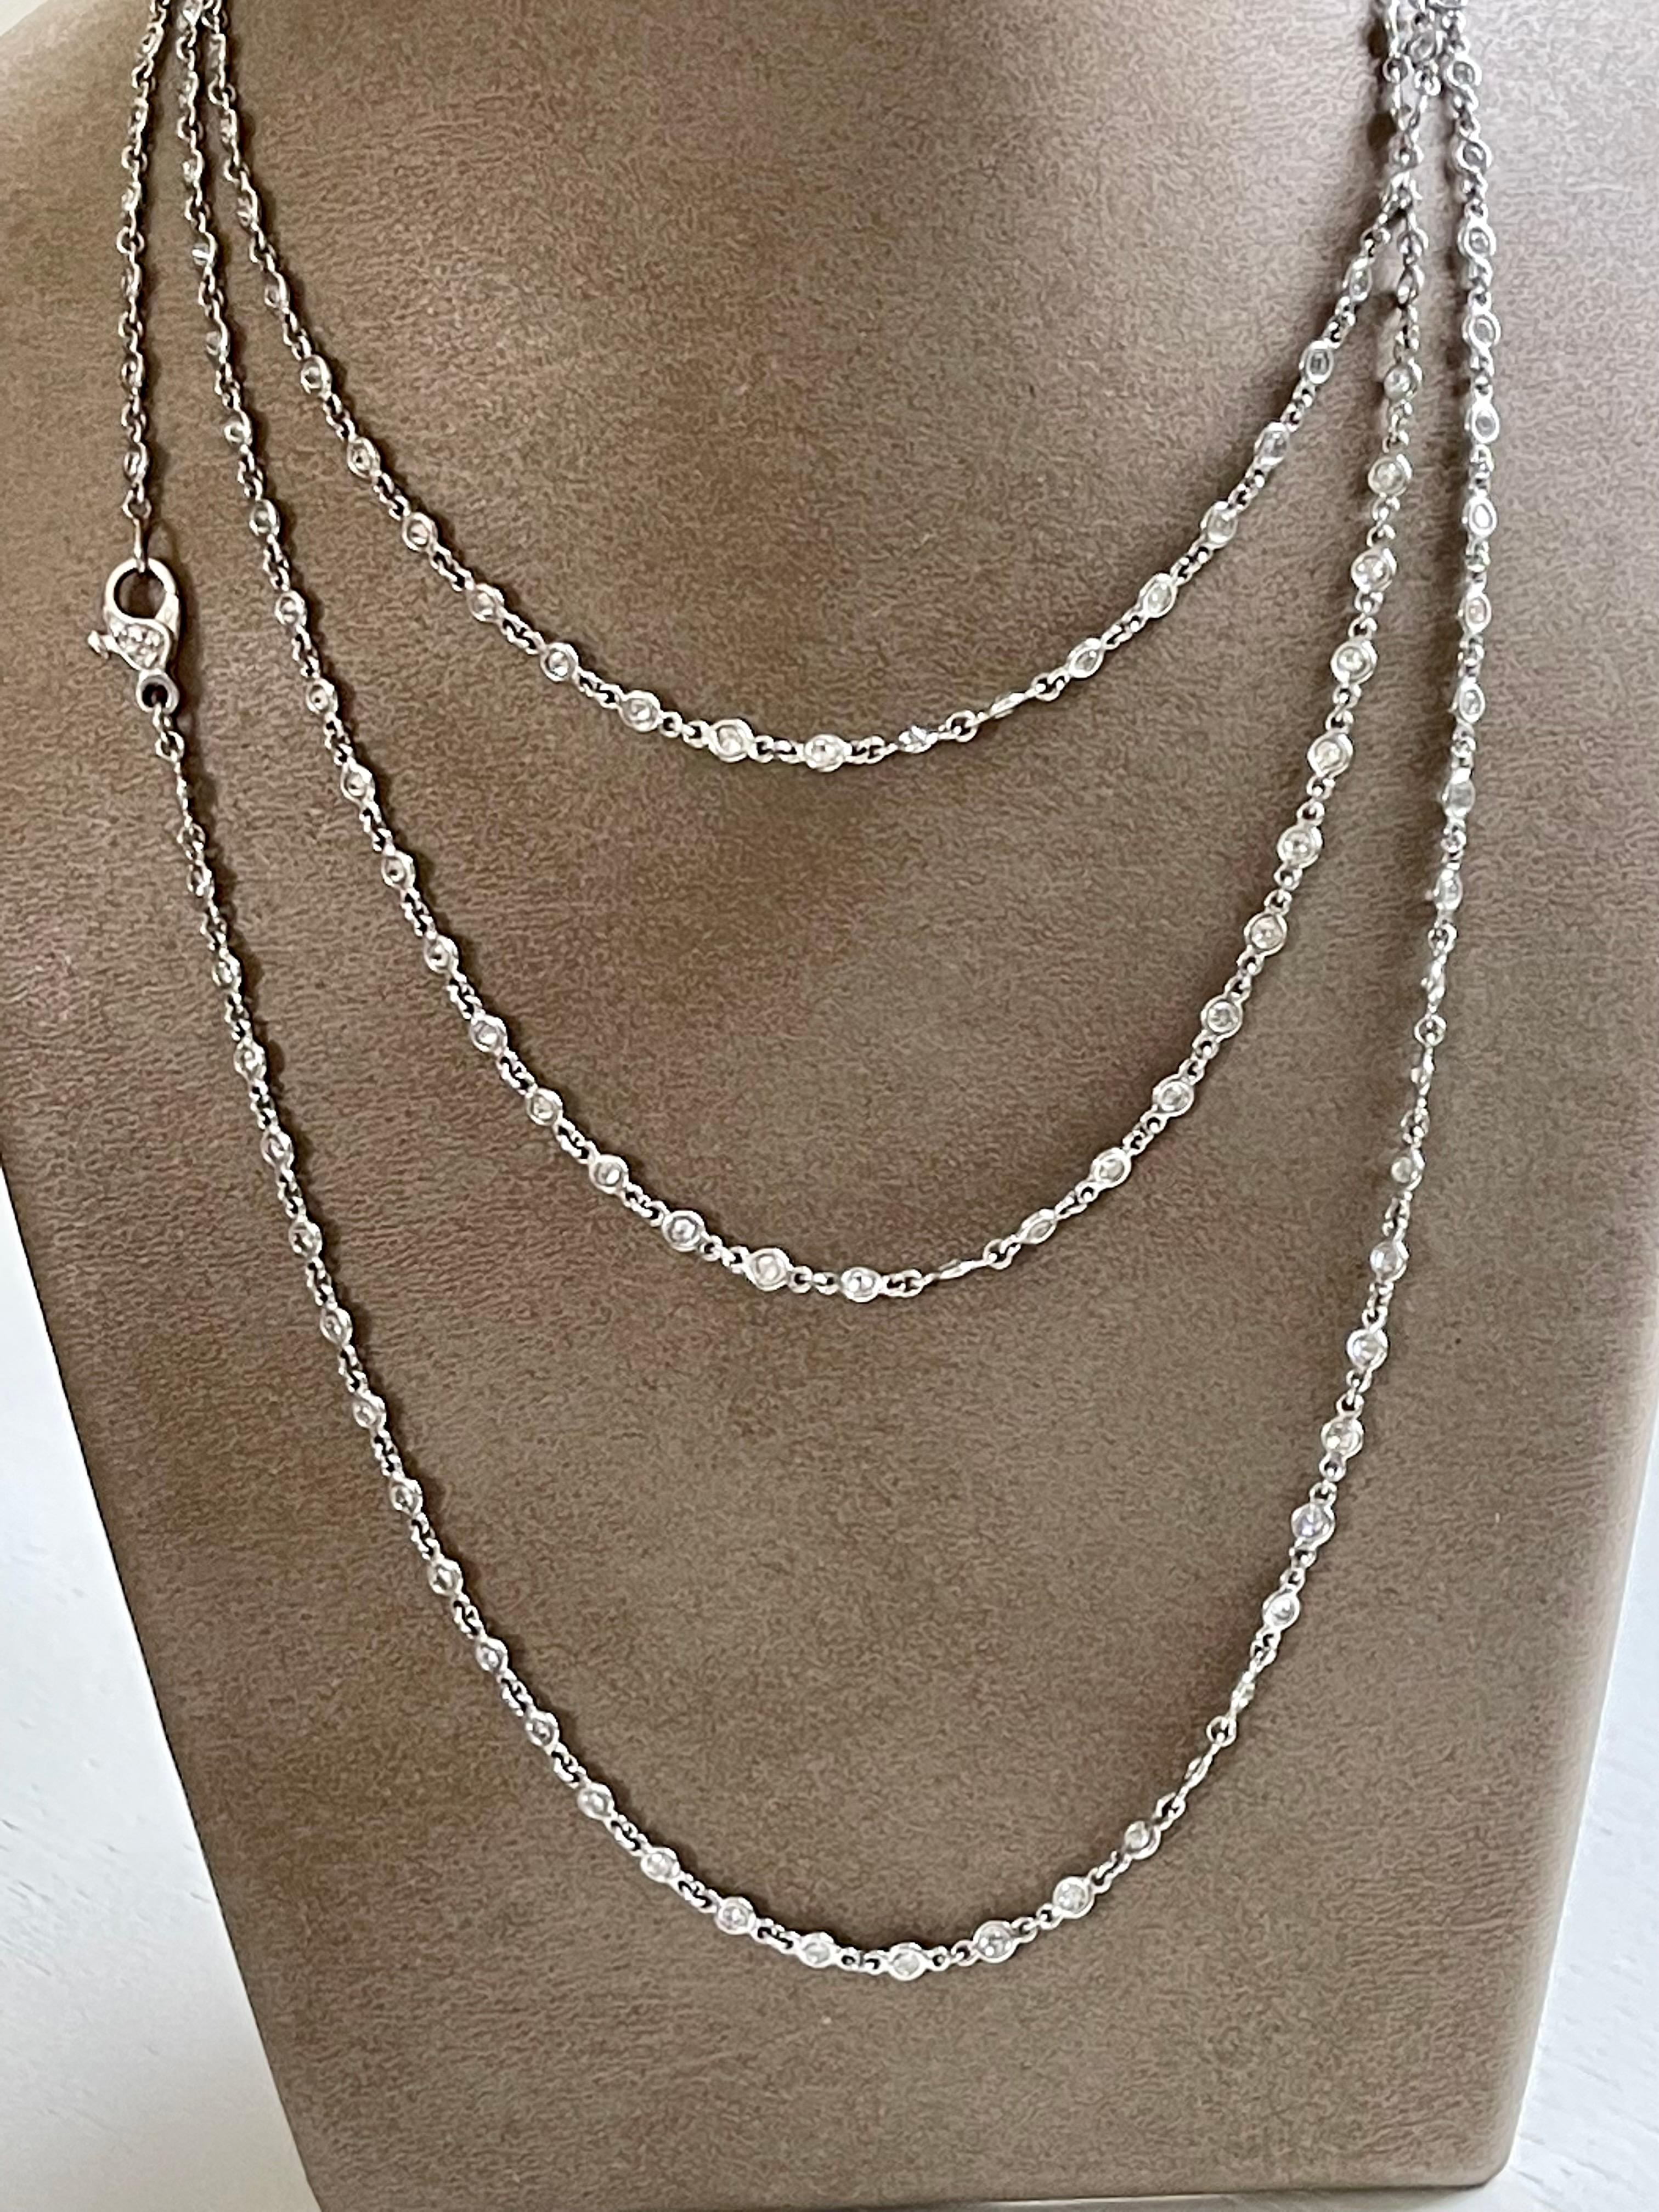 Fashion is subtle, effortless and elegant. If done right it should never go out of style and should be for every occasion. This diamonds by the yard necklace is exemplary of this. Featuring 169 diamonds each expertly bezel set in 18 K white Gold